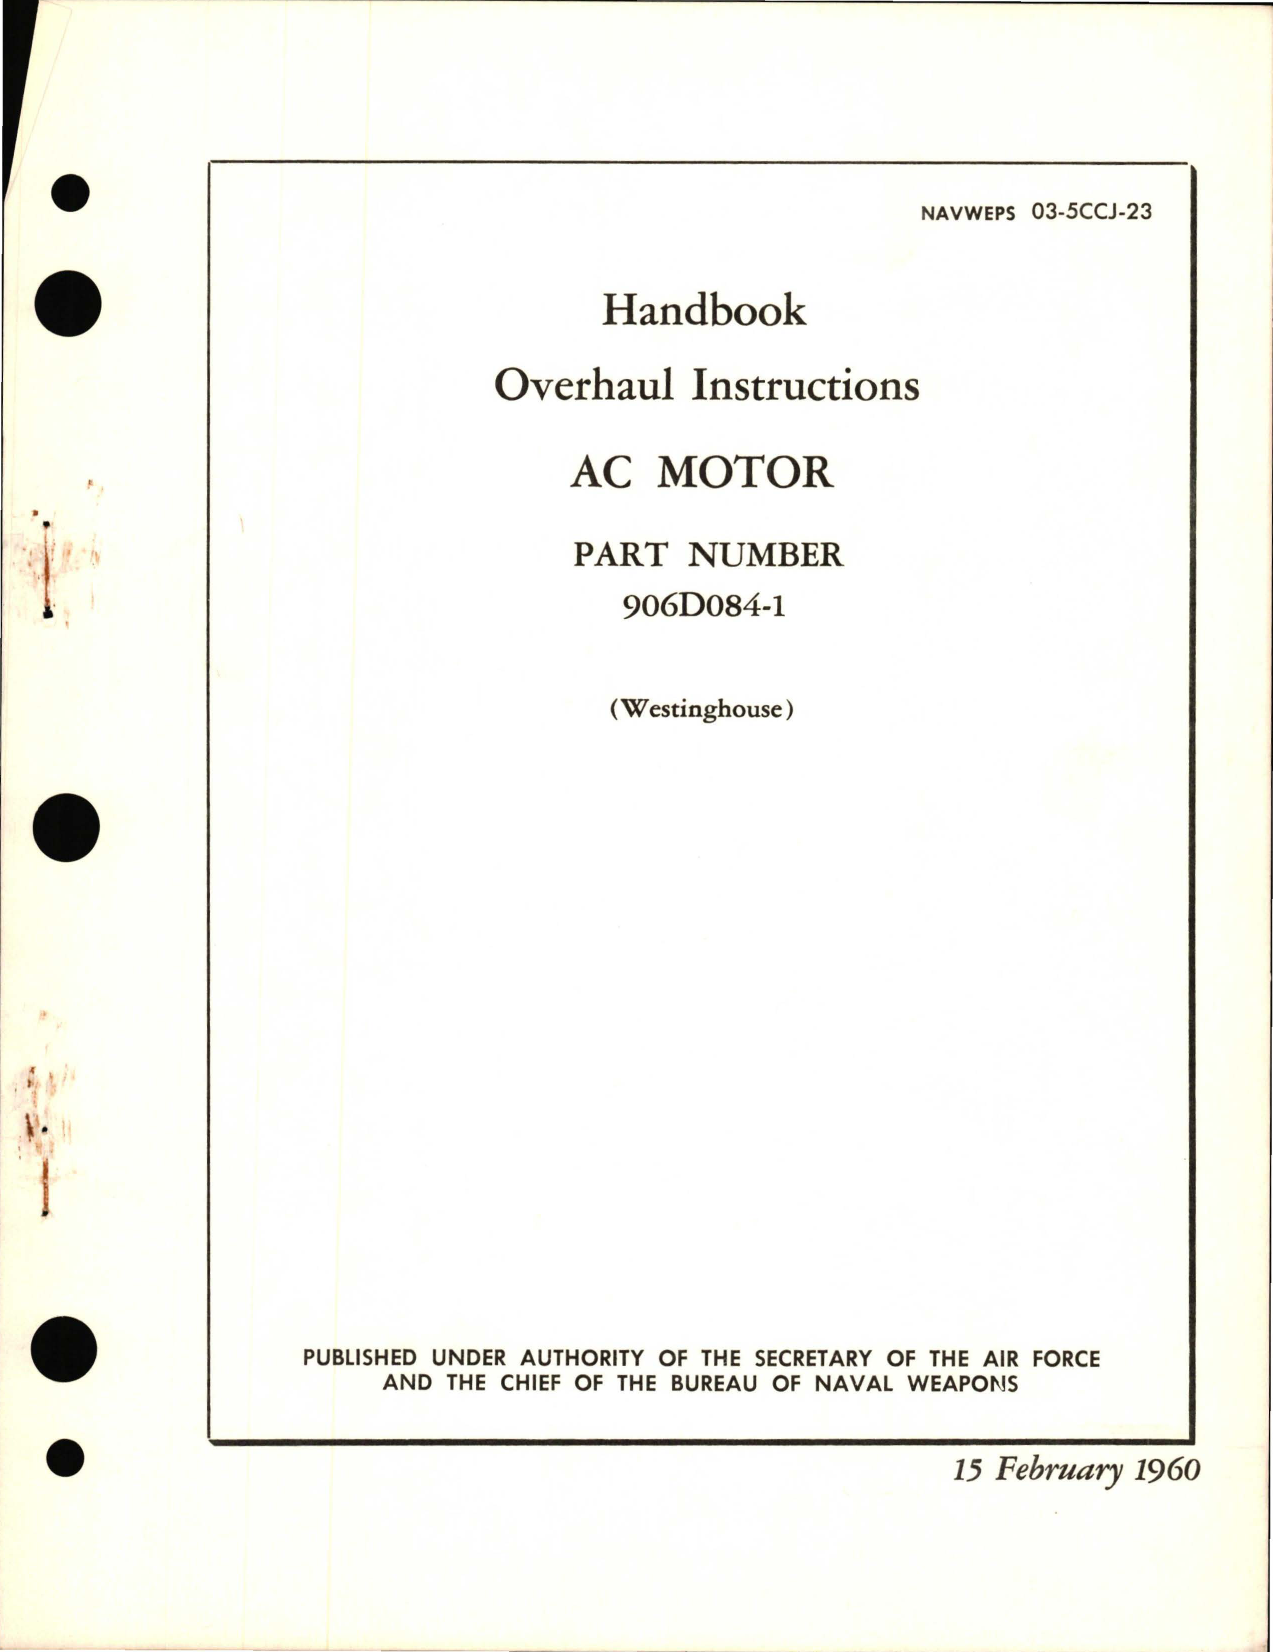 Sample page 1 from AirCorps Library document: Overhaul Instructions for AC Motor - Part 906D084-1 